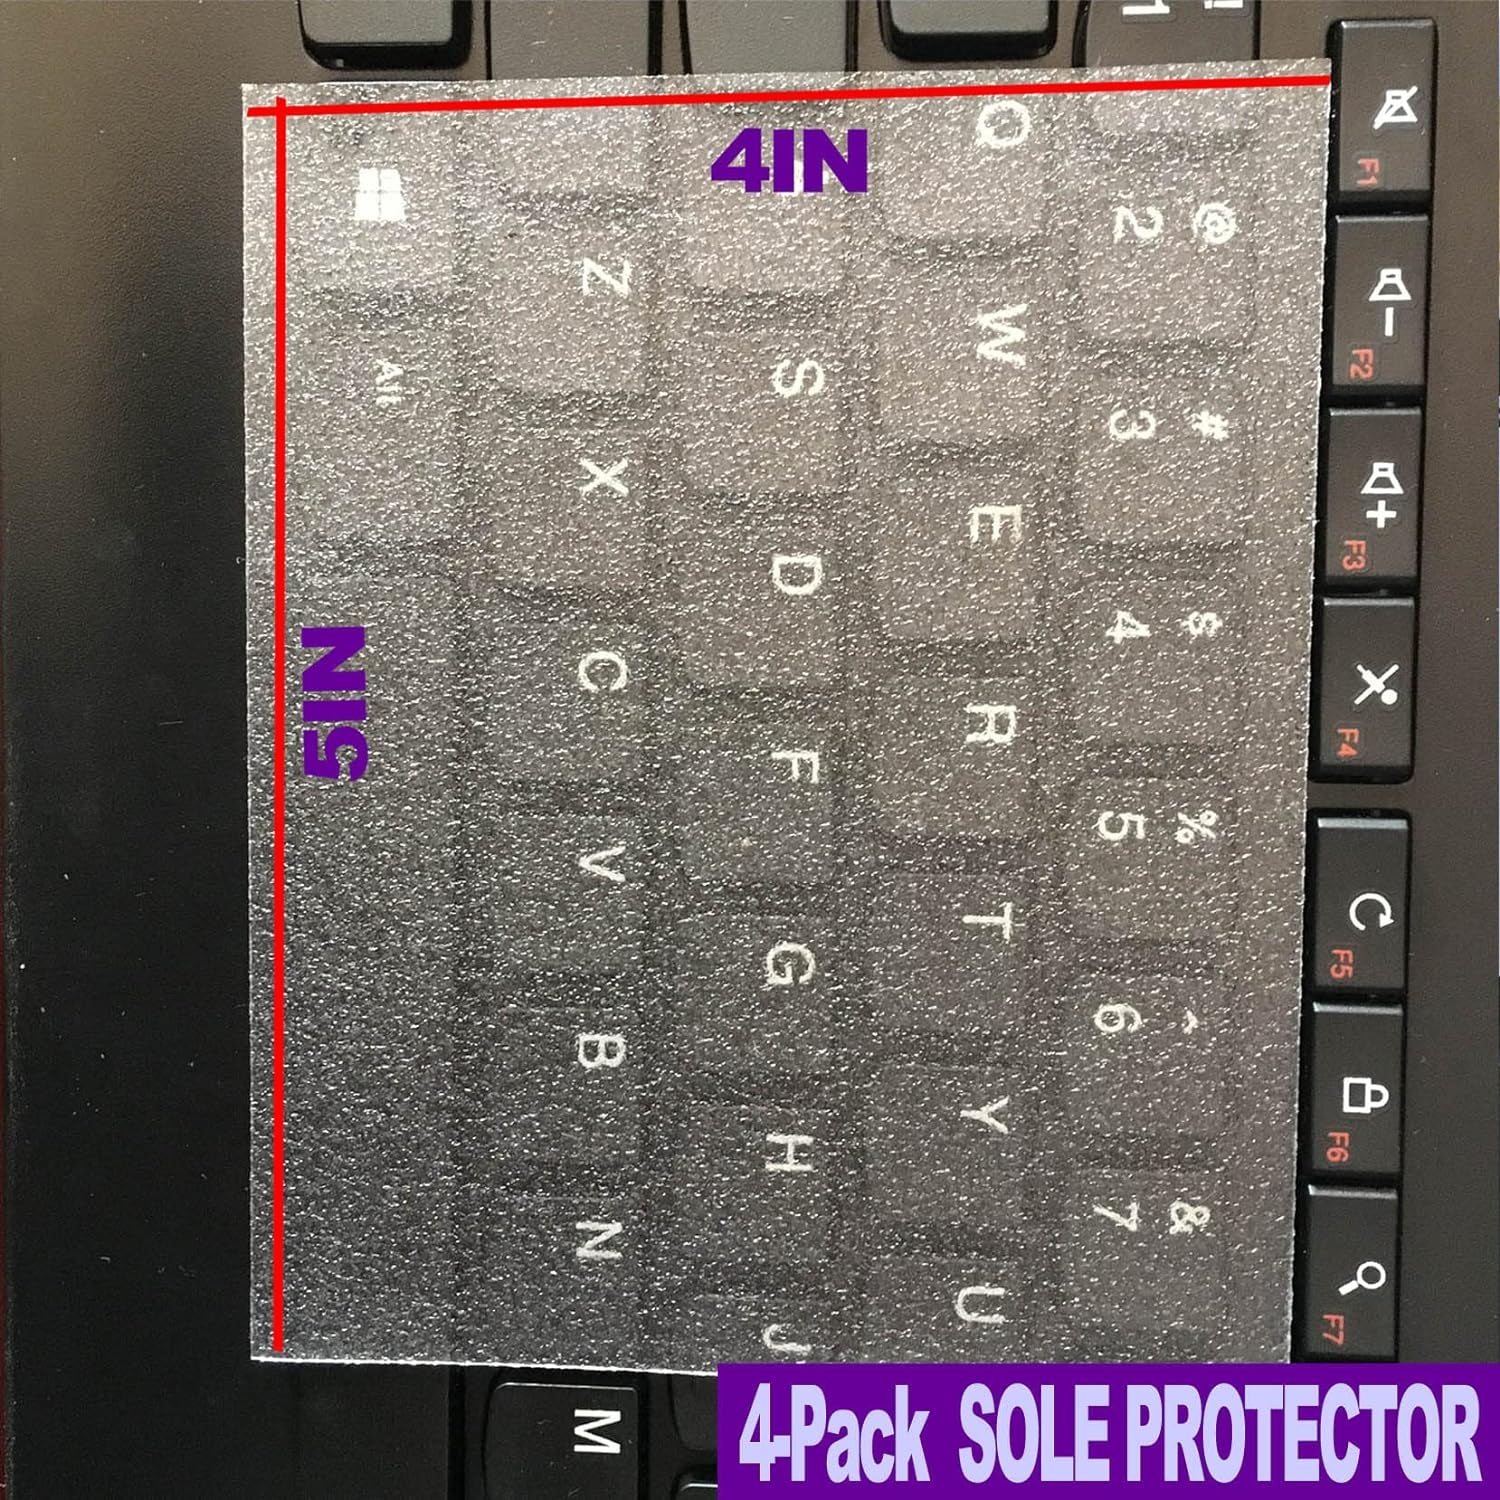 Sole Protector for Red Bottom Shoes